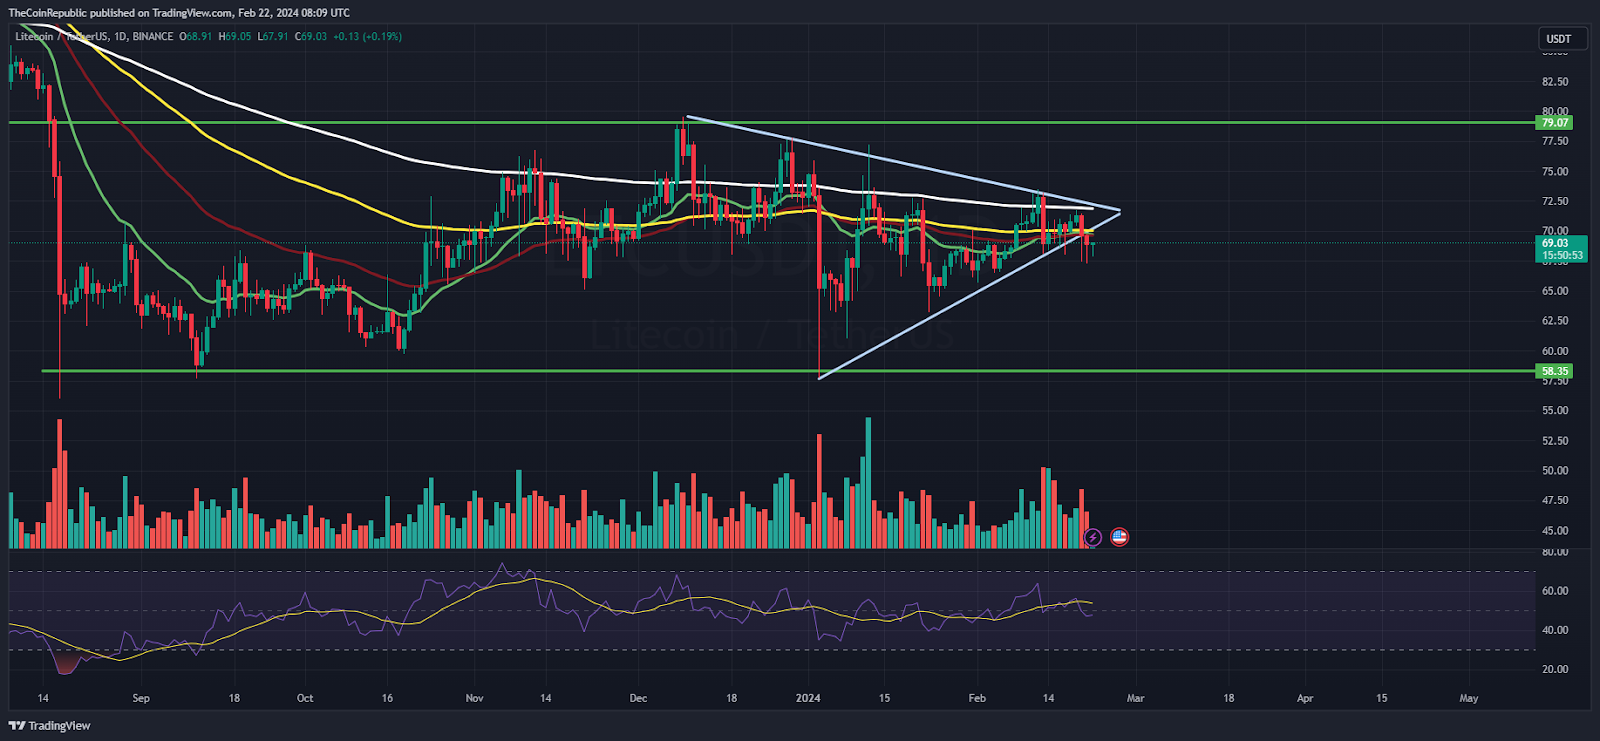 Litecoin (LTC) Depleting Gains: Are Bears Watching the $50 Mark?